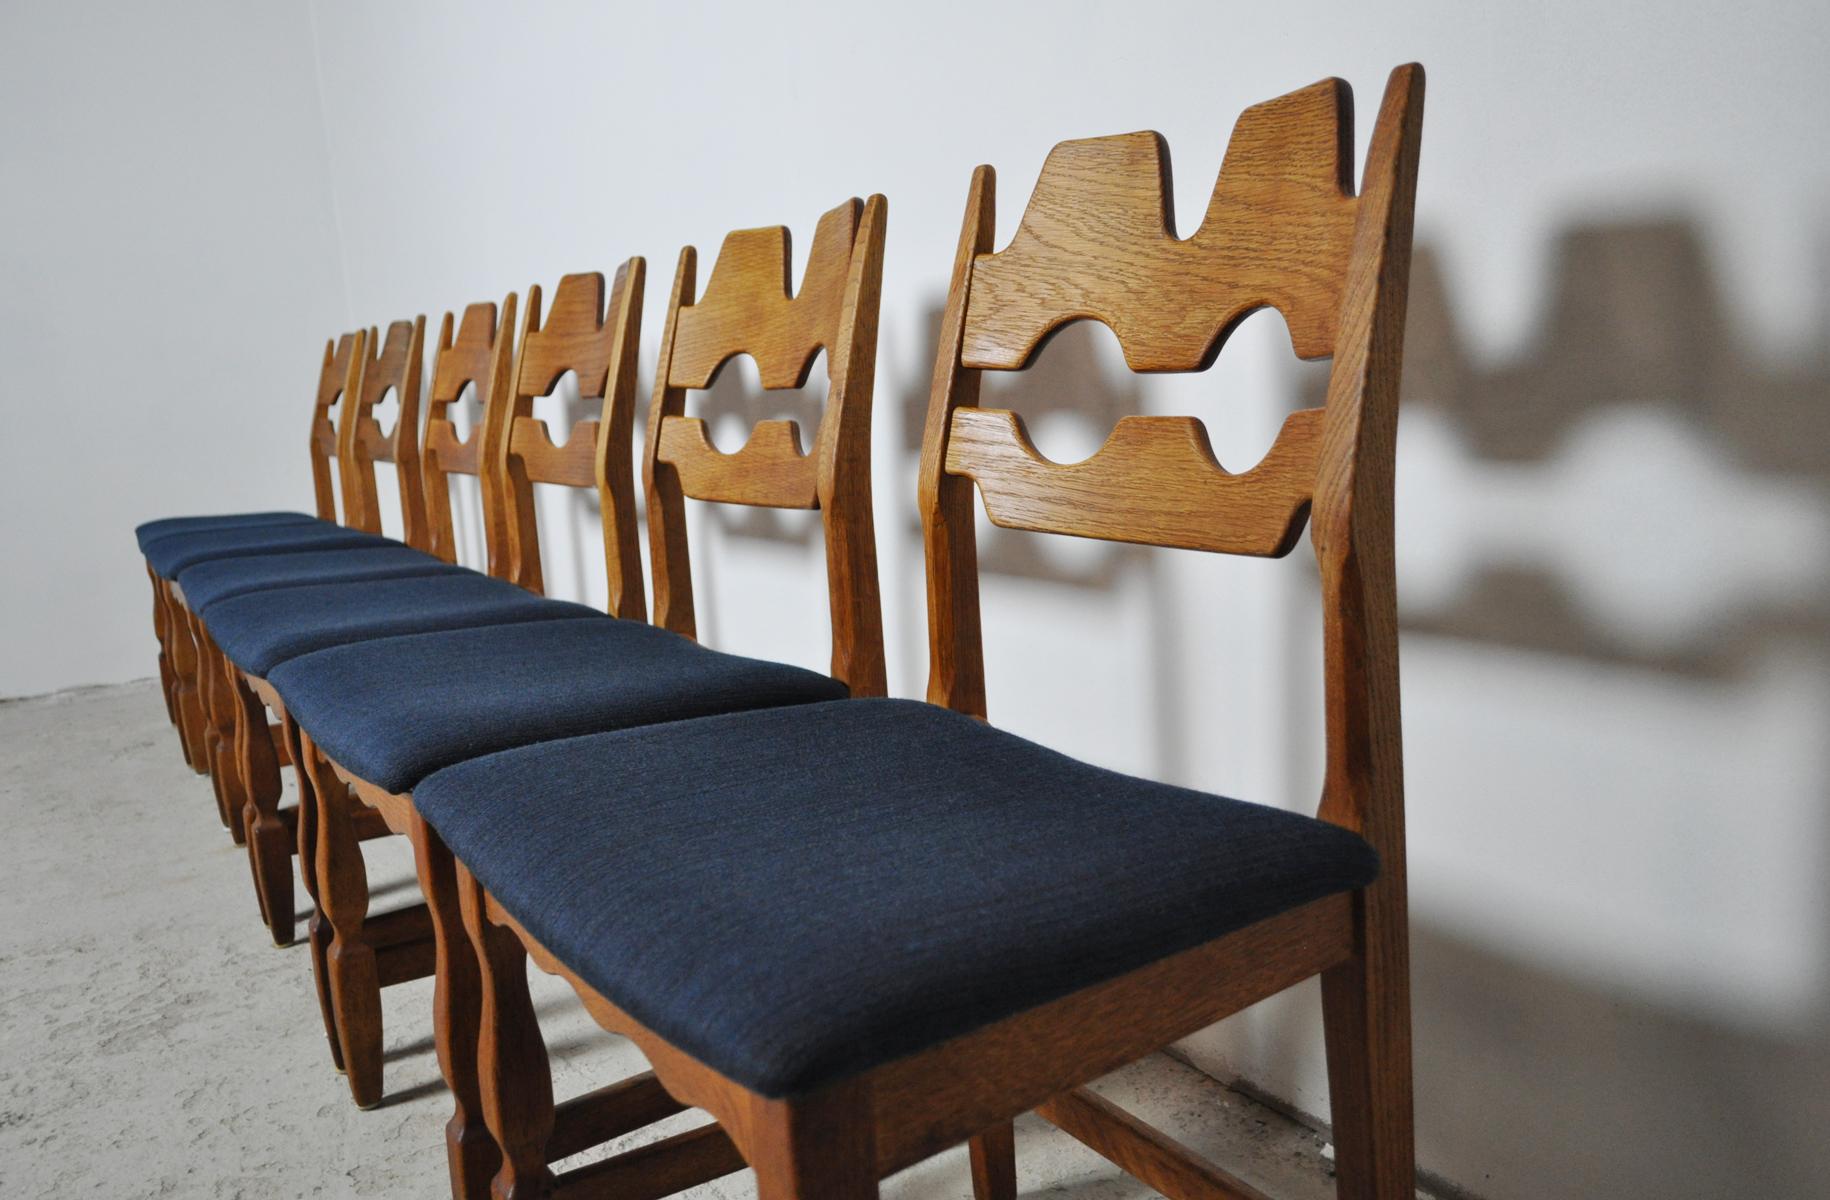 Set of 6 dining chairs designed by Henning Kjærnulf, made of solid oak and new upholstery with dark blue wool fabric. 

A design where rustic meets modernism design. Gently refurbished solid oak with a beautiful grain. More items available which can